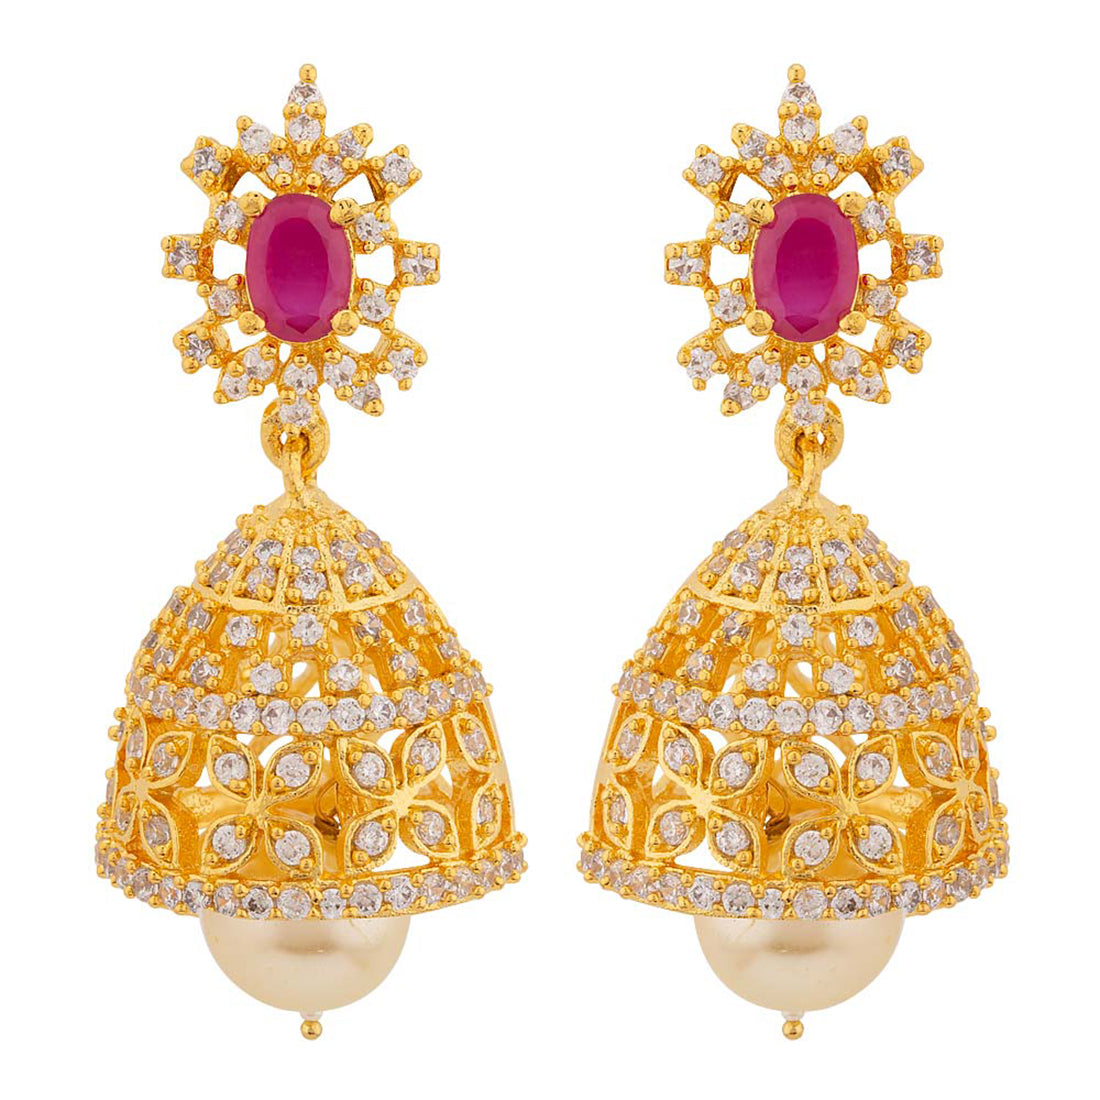 Faux Pearls and Gems Adorned Earrings